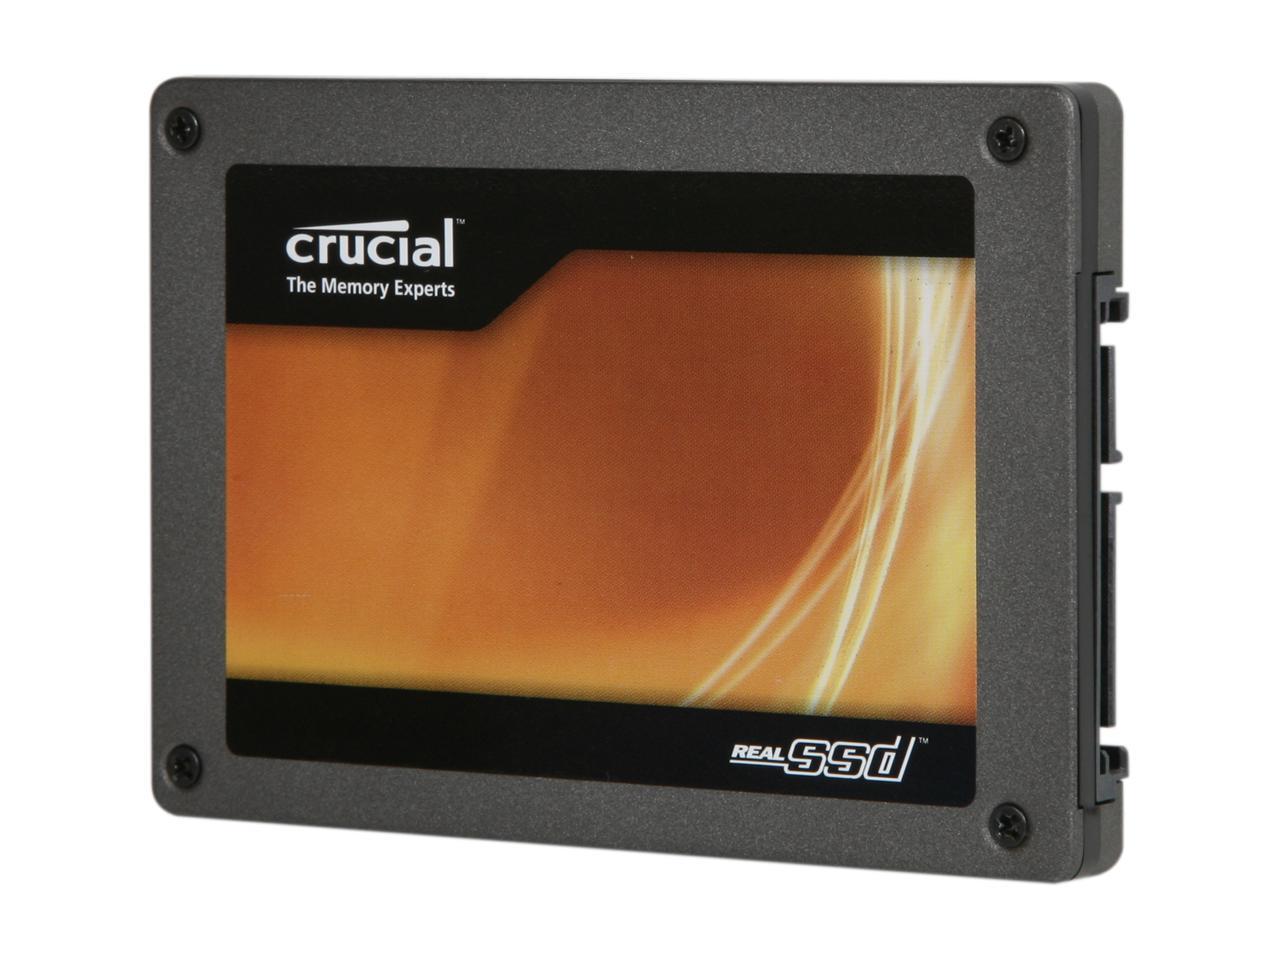 Crucial RealSSD C300 2.5